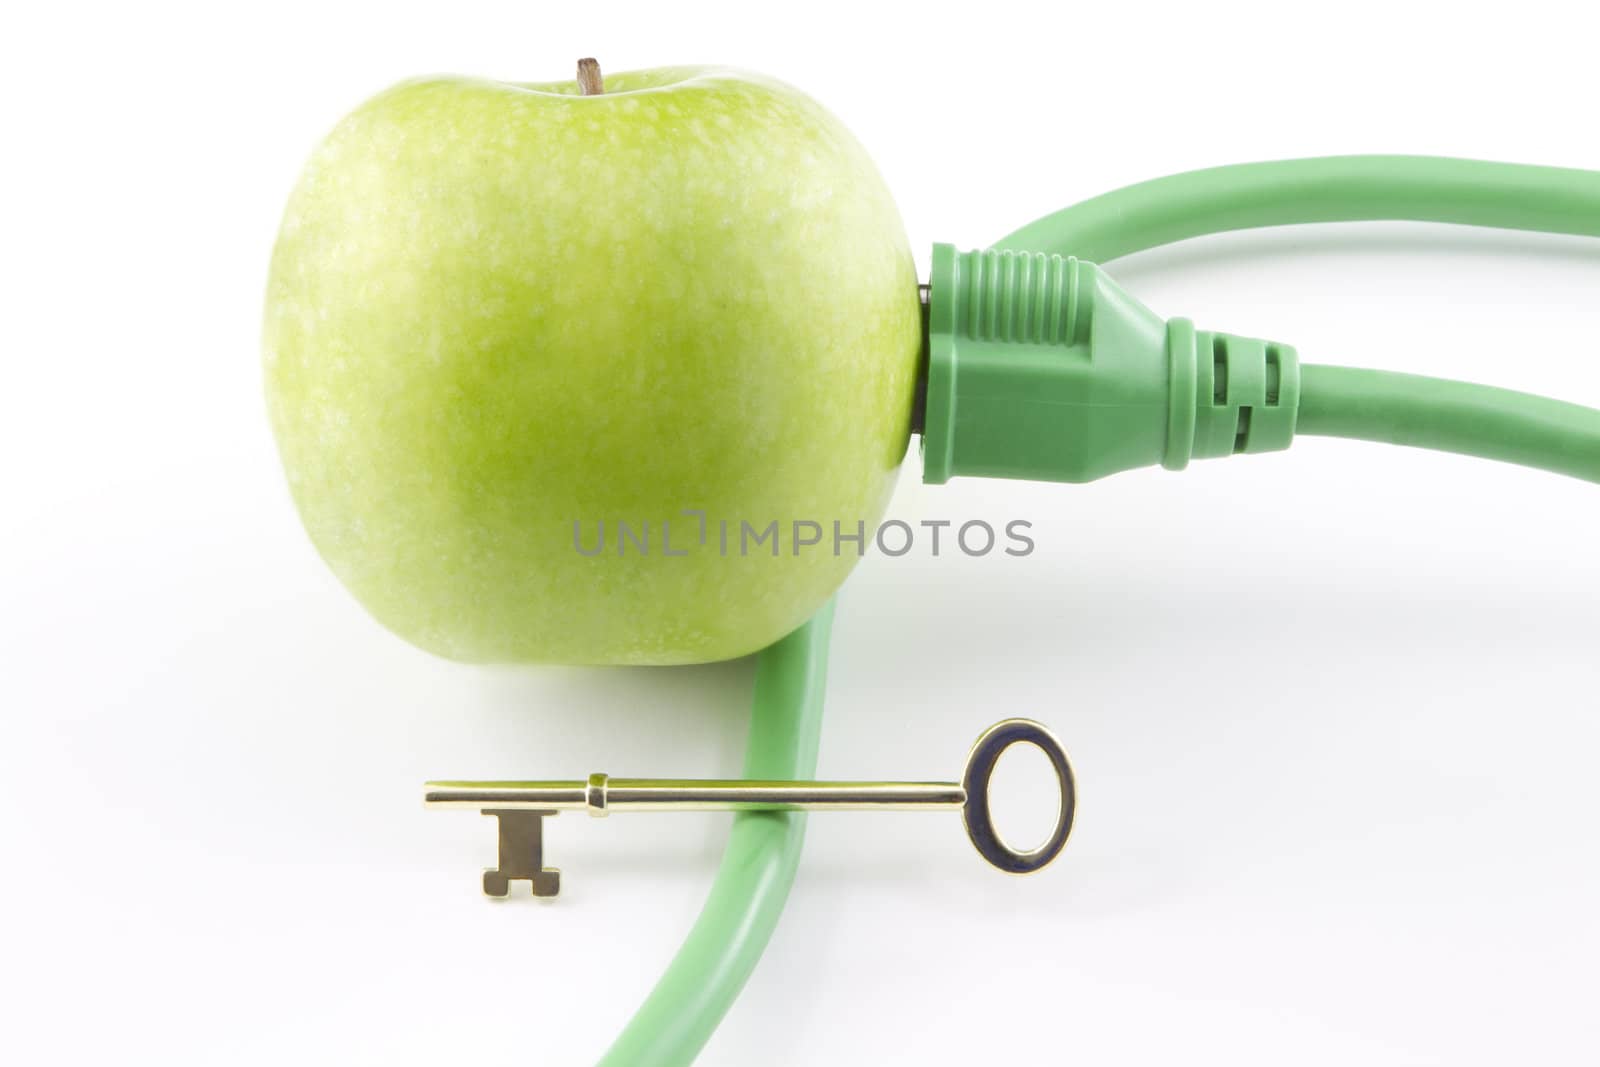 Golden key sits on electric cable with its plug inserted into green apple to represent the challenging key to a clean energy future